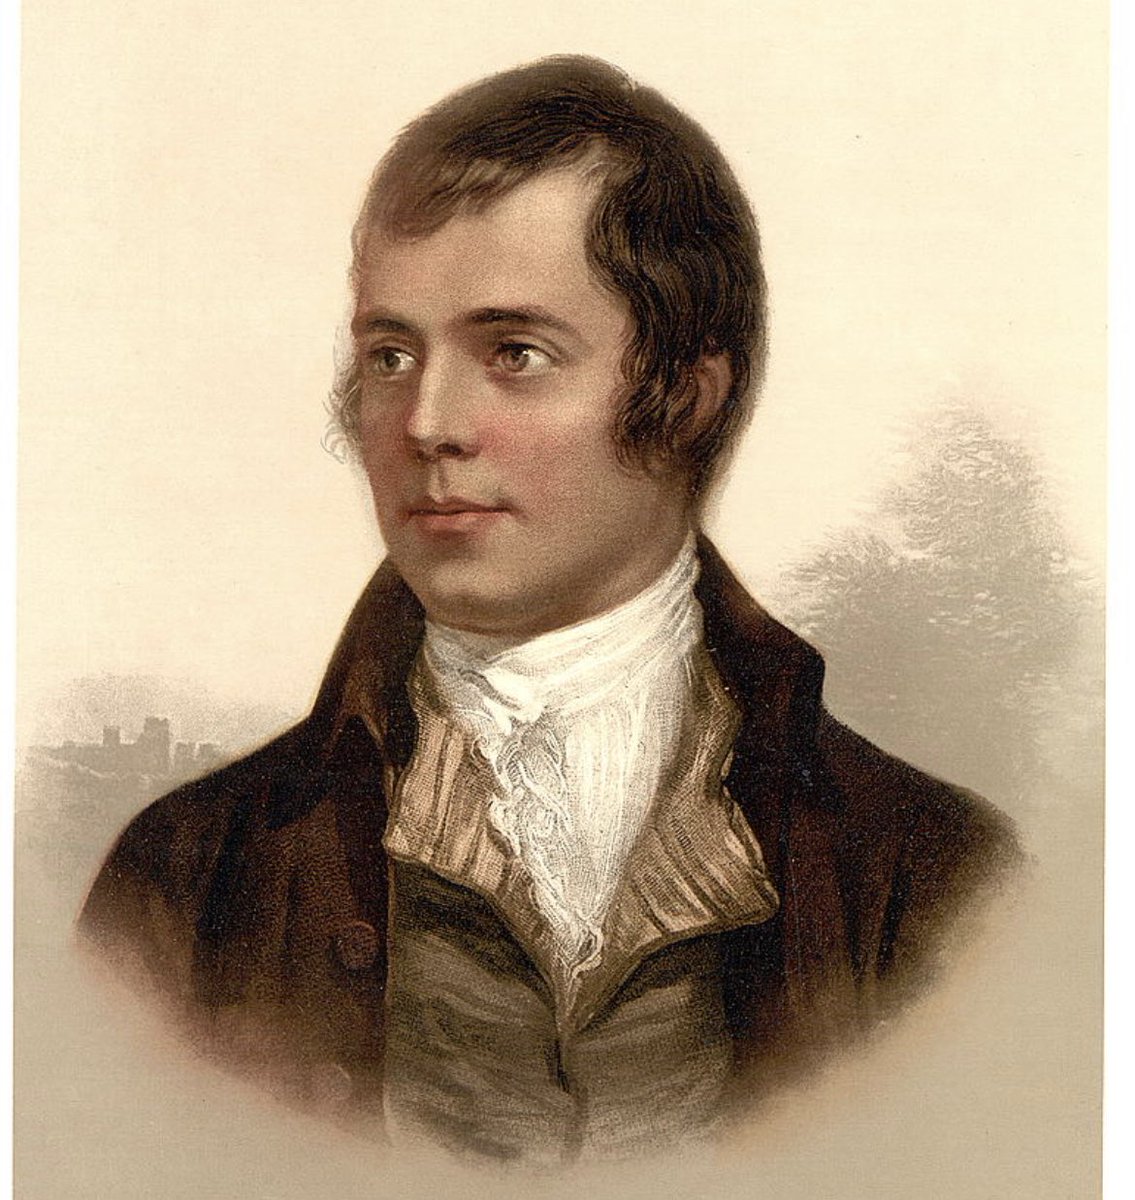 Happy Burns Day to Scots all across the World 🏴󠁧󠁢󠁳󠁣󠁴󠁿🌎 #HappyBurnsDay #RobertBurns #AuldLangSyne #Scots #Scotland youtu.be/to1xT93IlUI